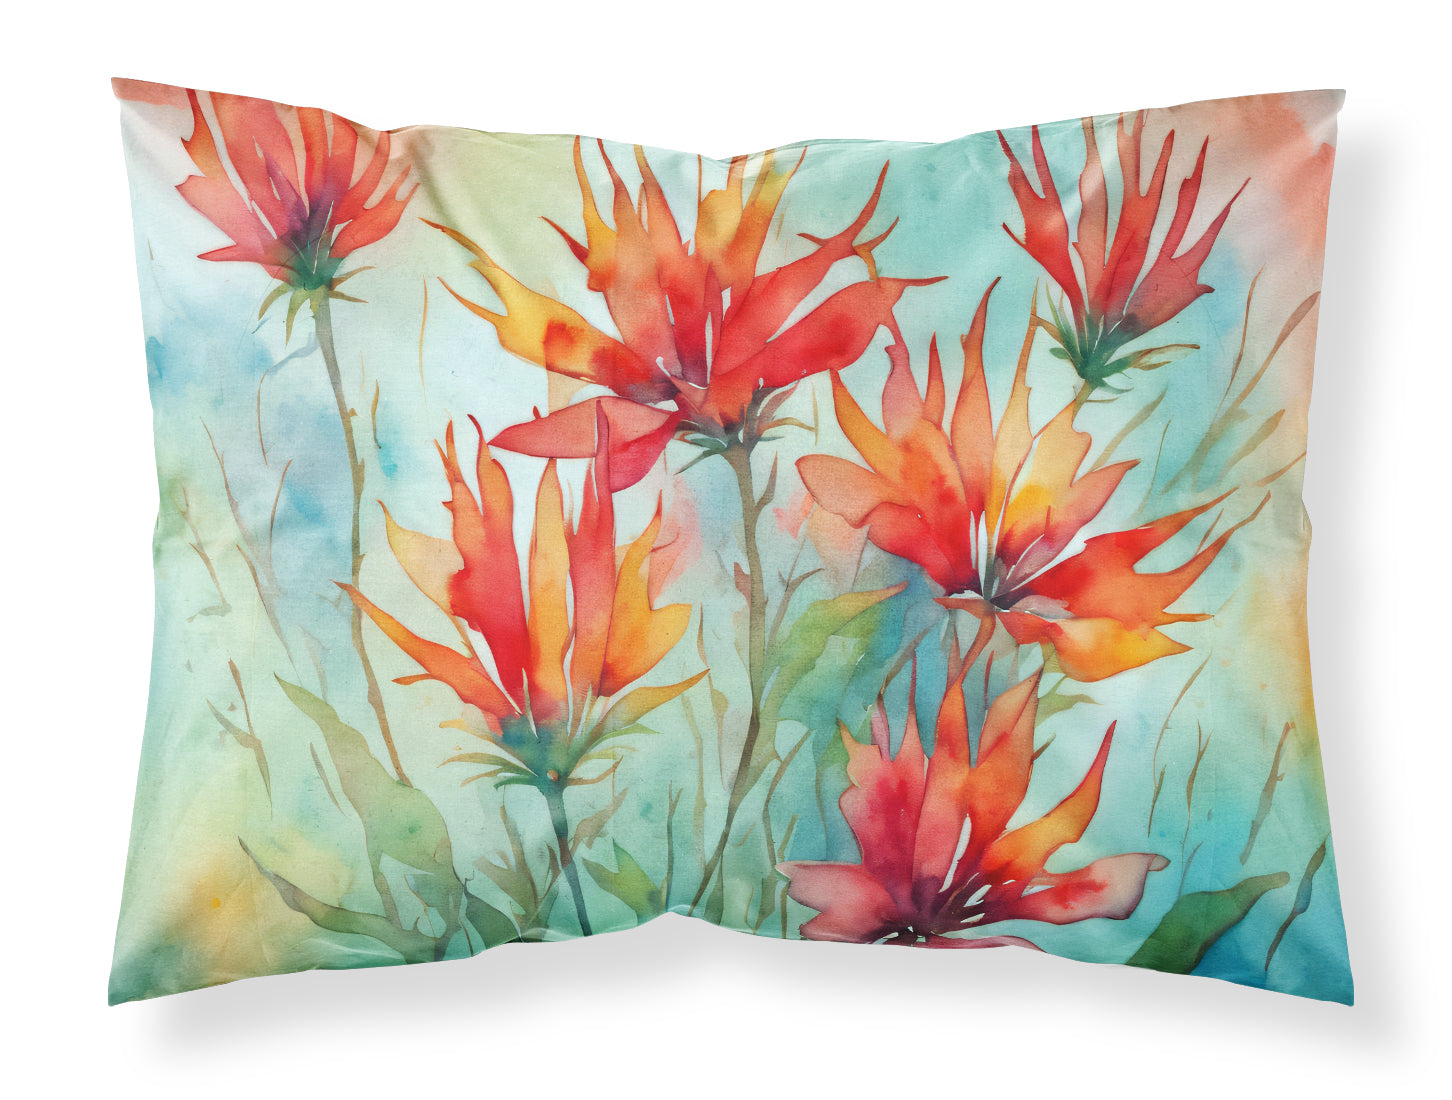 Buy this Wyoming Indian Paintbrush in Watercolor Fabric Standard Pillowcase